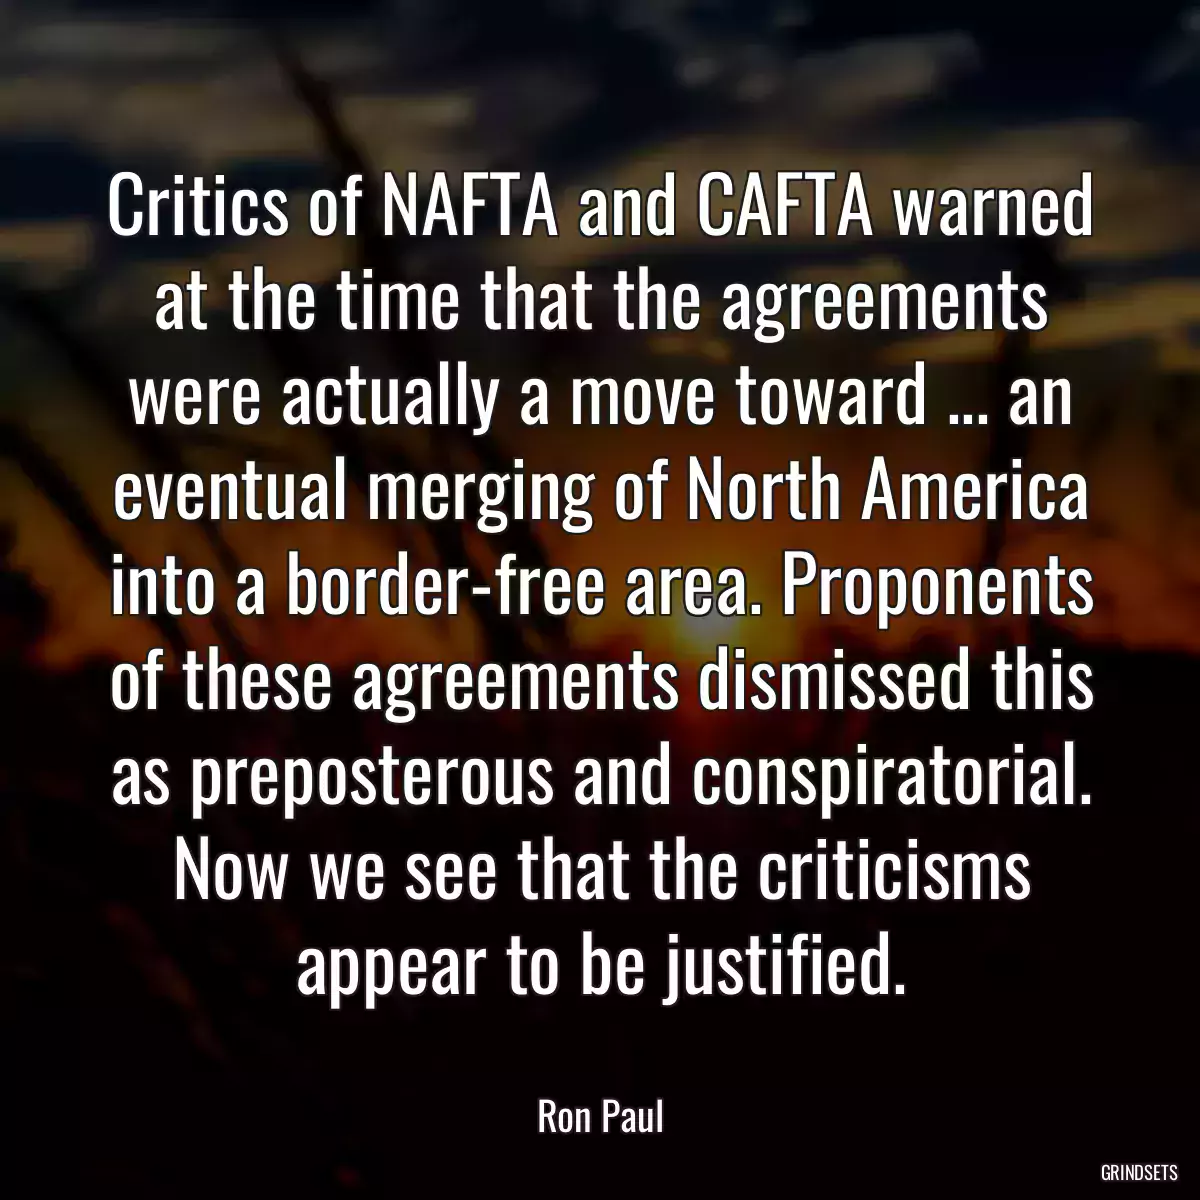 Critics of NAFTA and CAFTA warned at the time that the agreements were actually a move toward ... an eventual merging of North America into a border-free area. Proponents of these agreements dismissed this as preposterous and conspiratorial. Now we see that the criticisms appear to be justified.